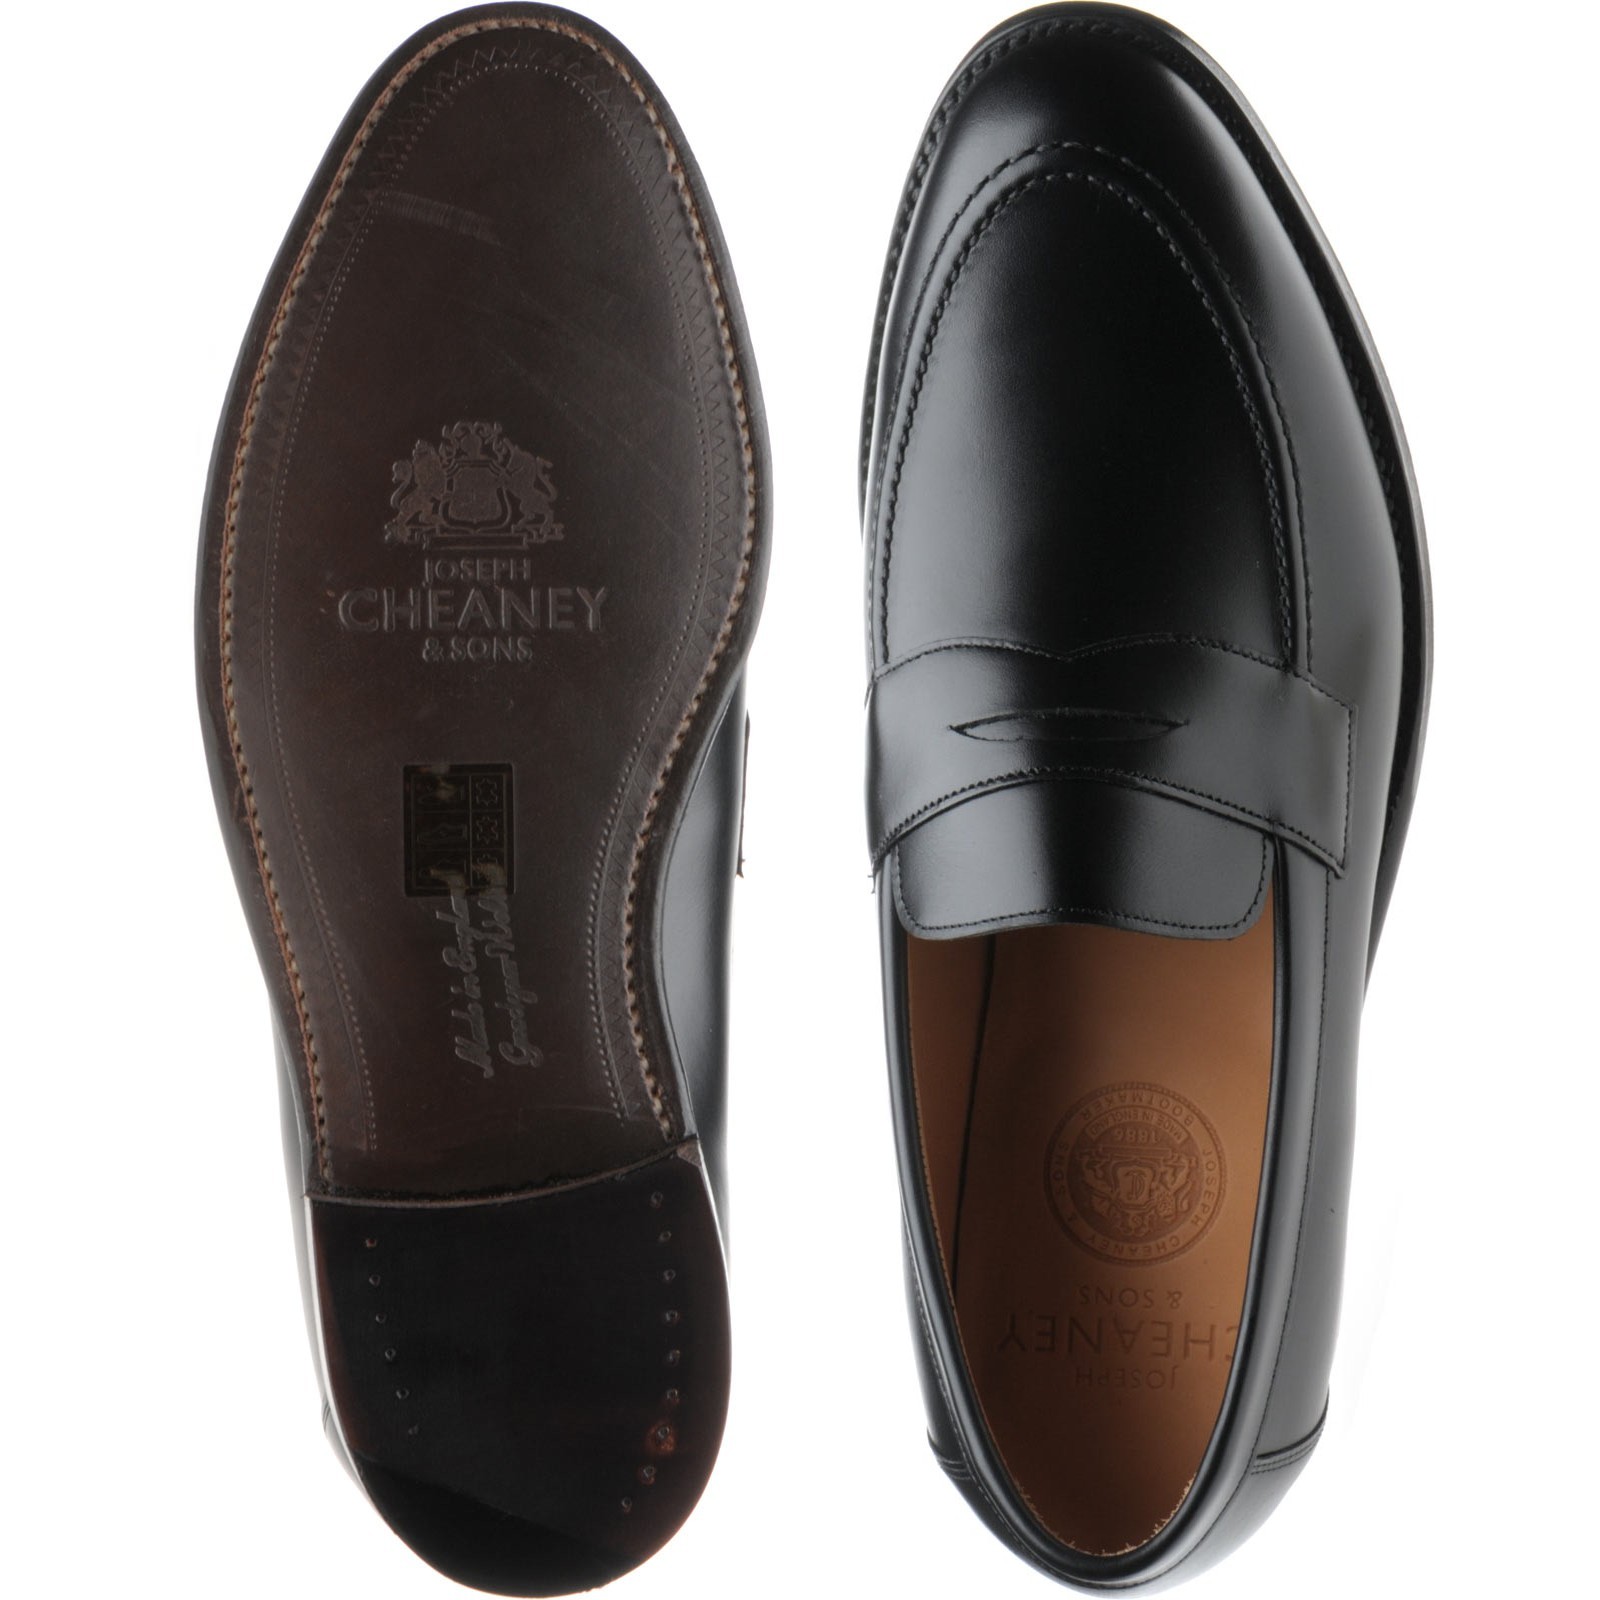 Cheaney shoes | Cheaney of England | Hadley in Black Calf at Herring Shoes